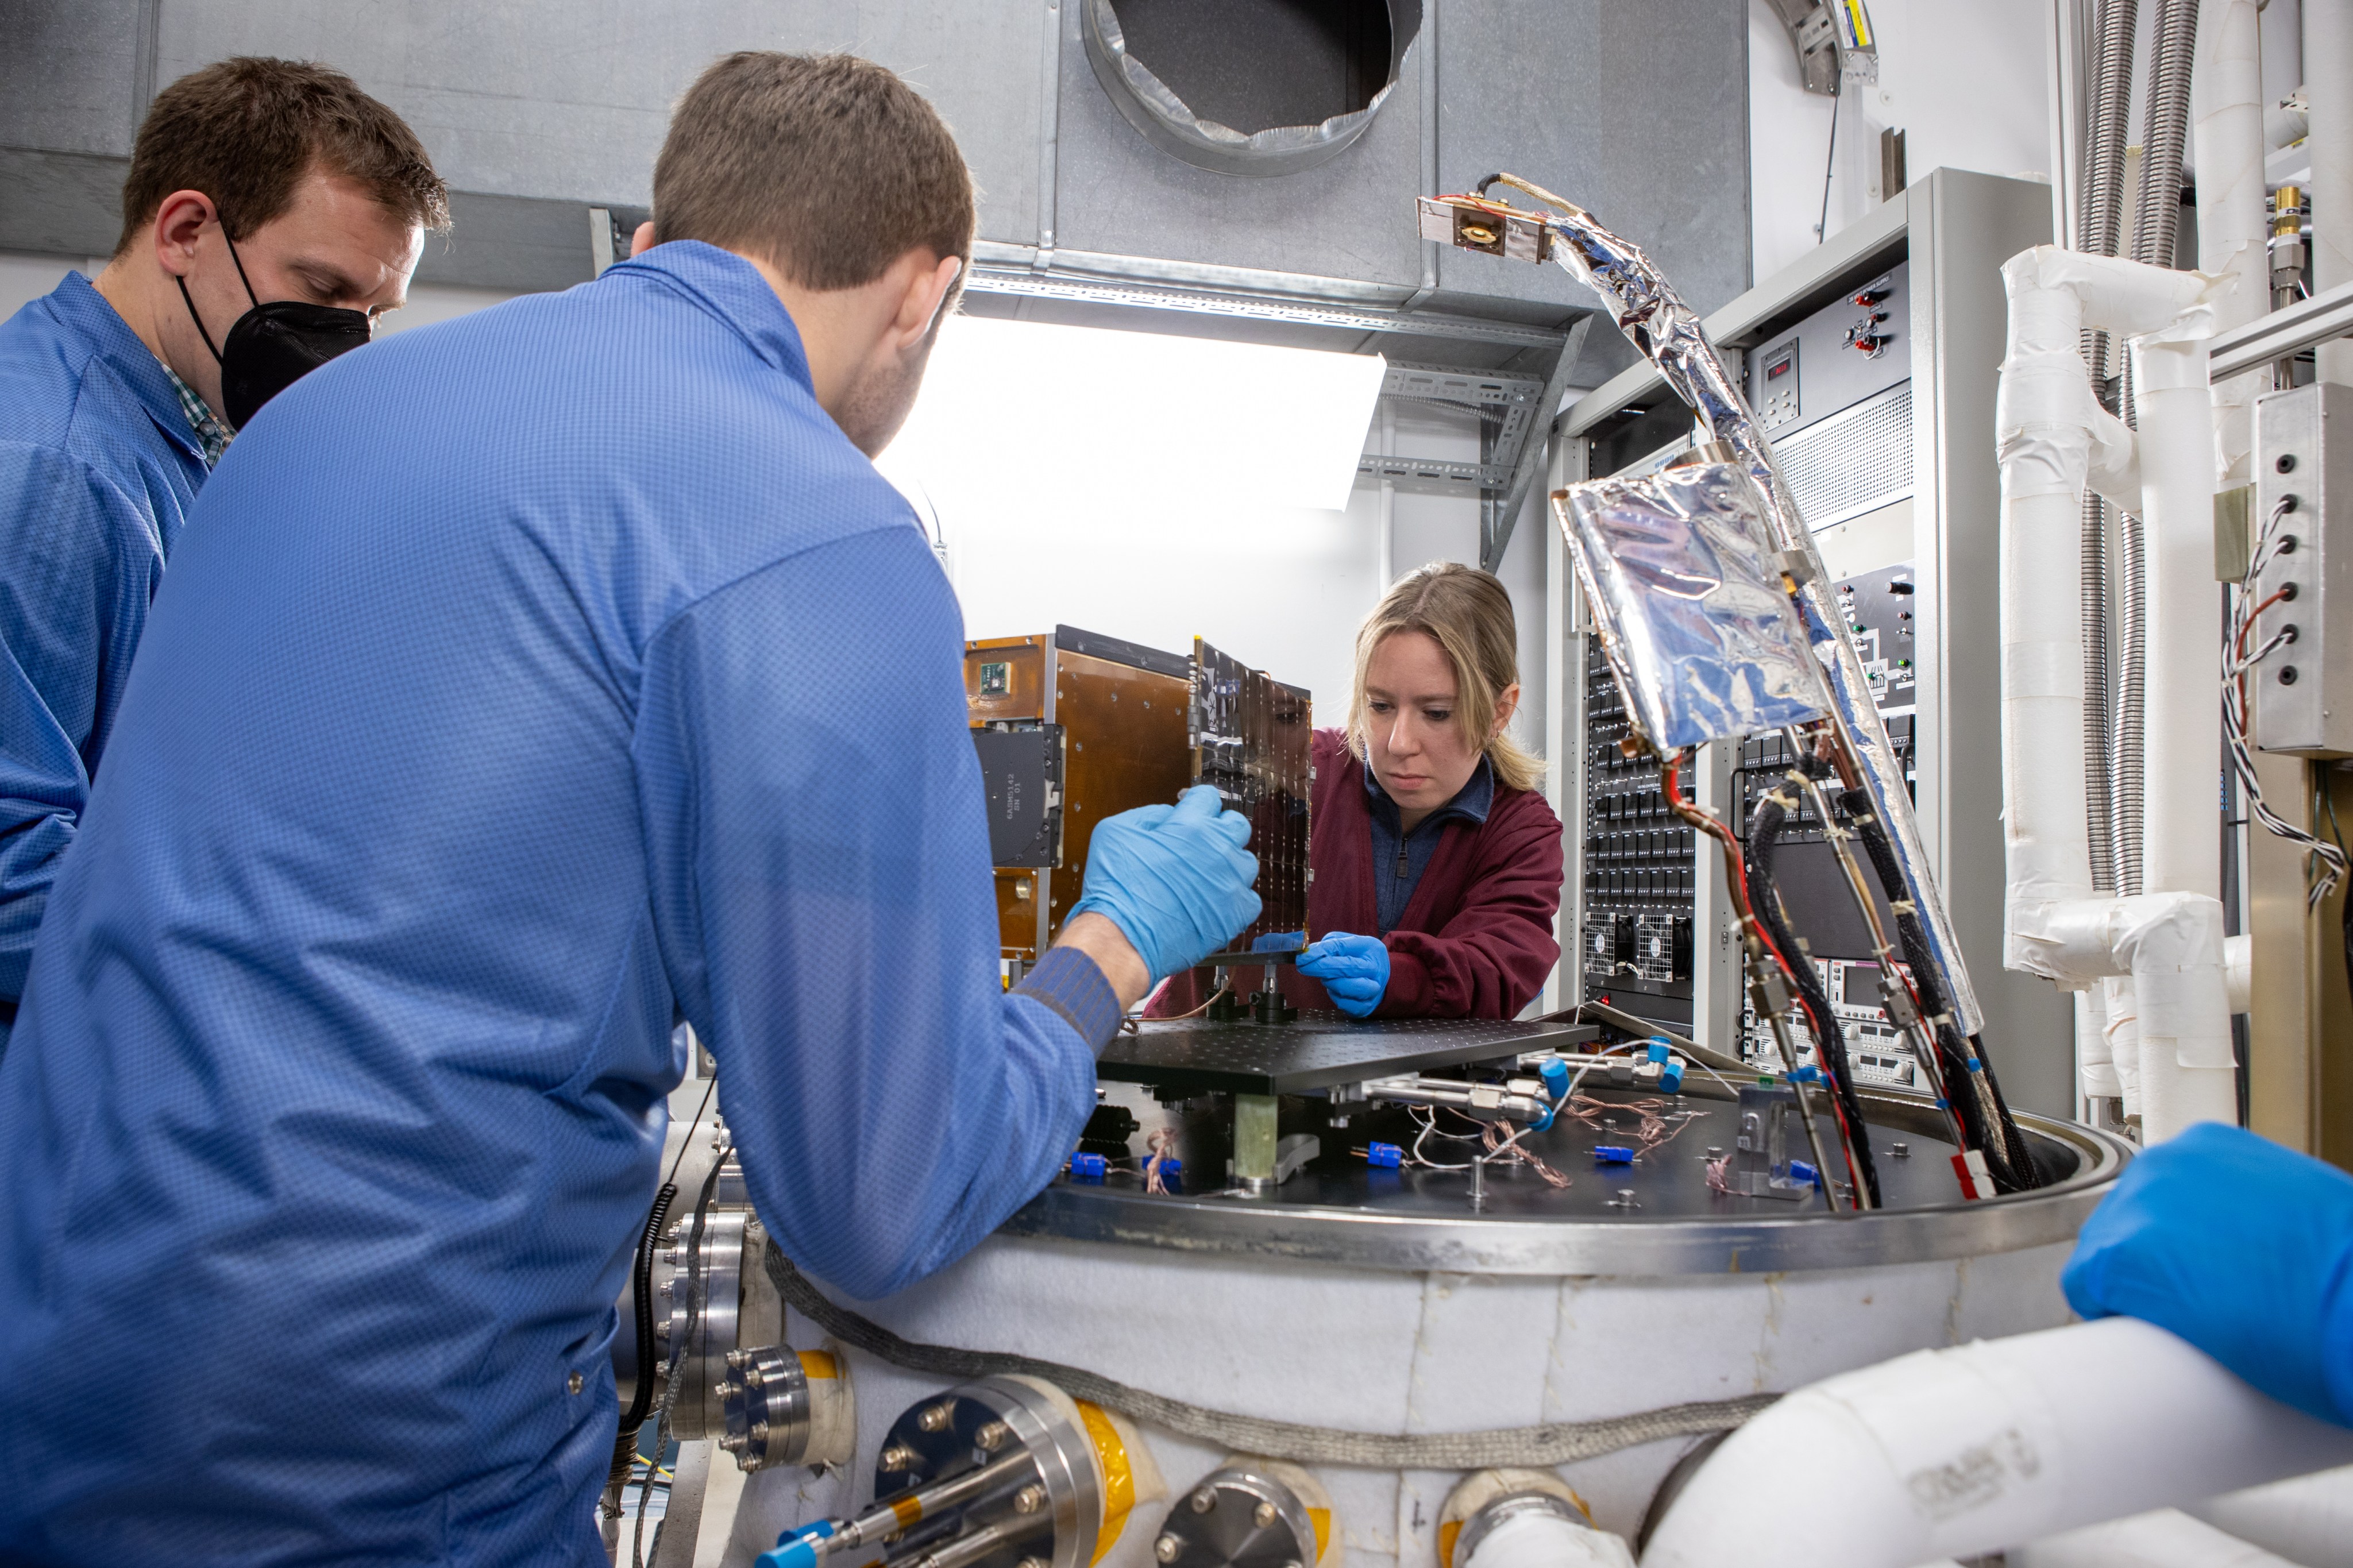 This photograph shows three people working on a spacecraft in a lab.